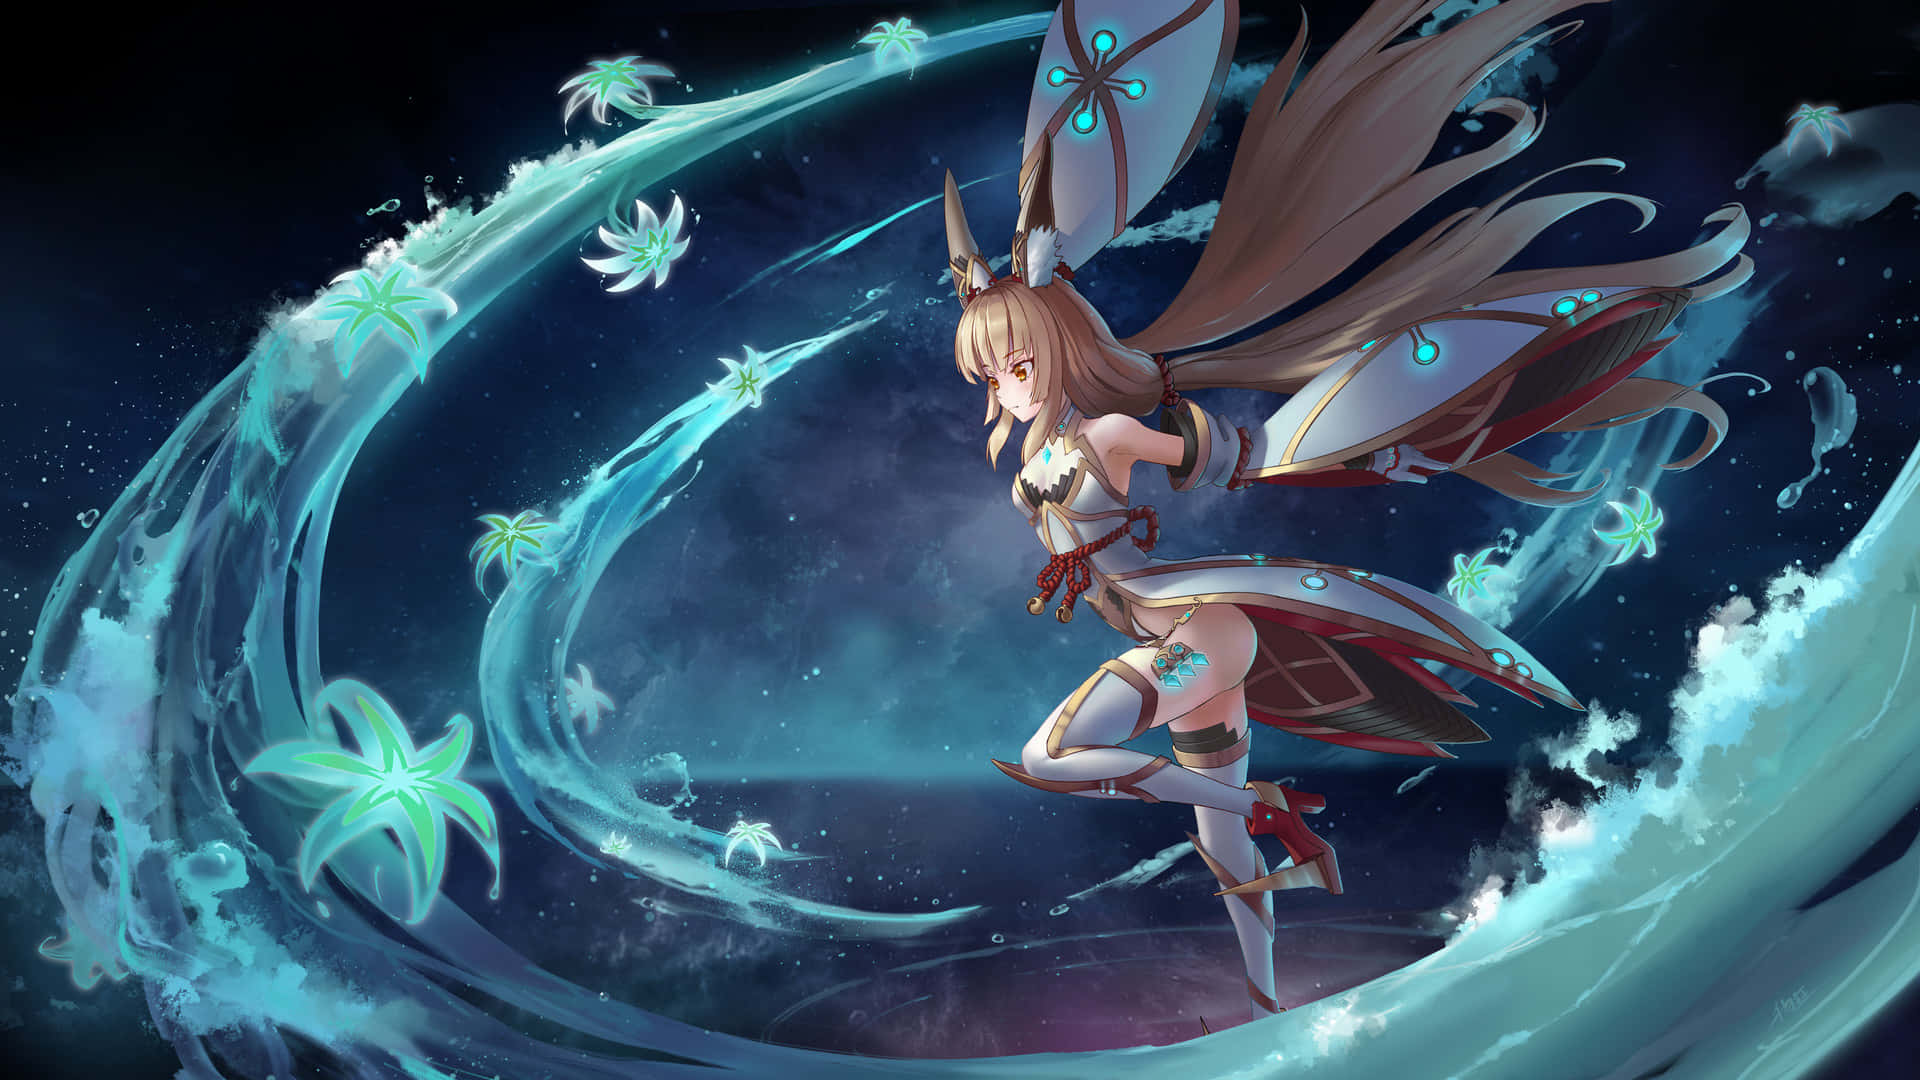 A Girl With Long Hair And Wings Flying In The Air Wallpaper